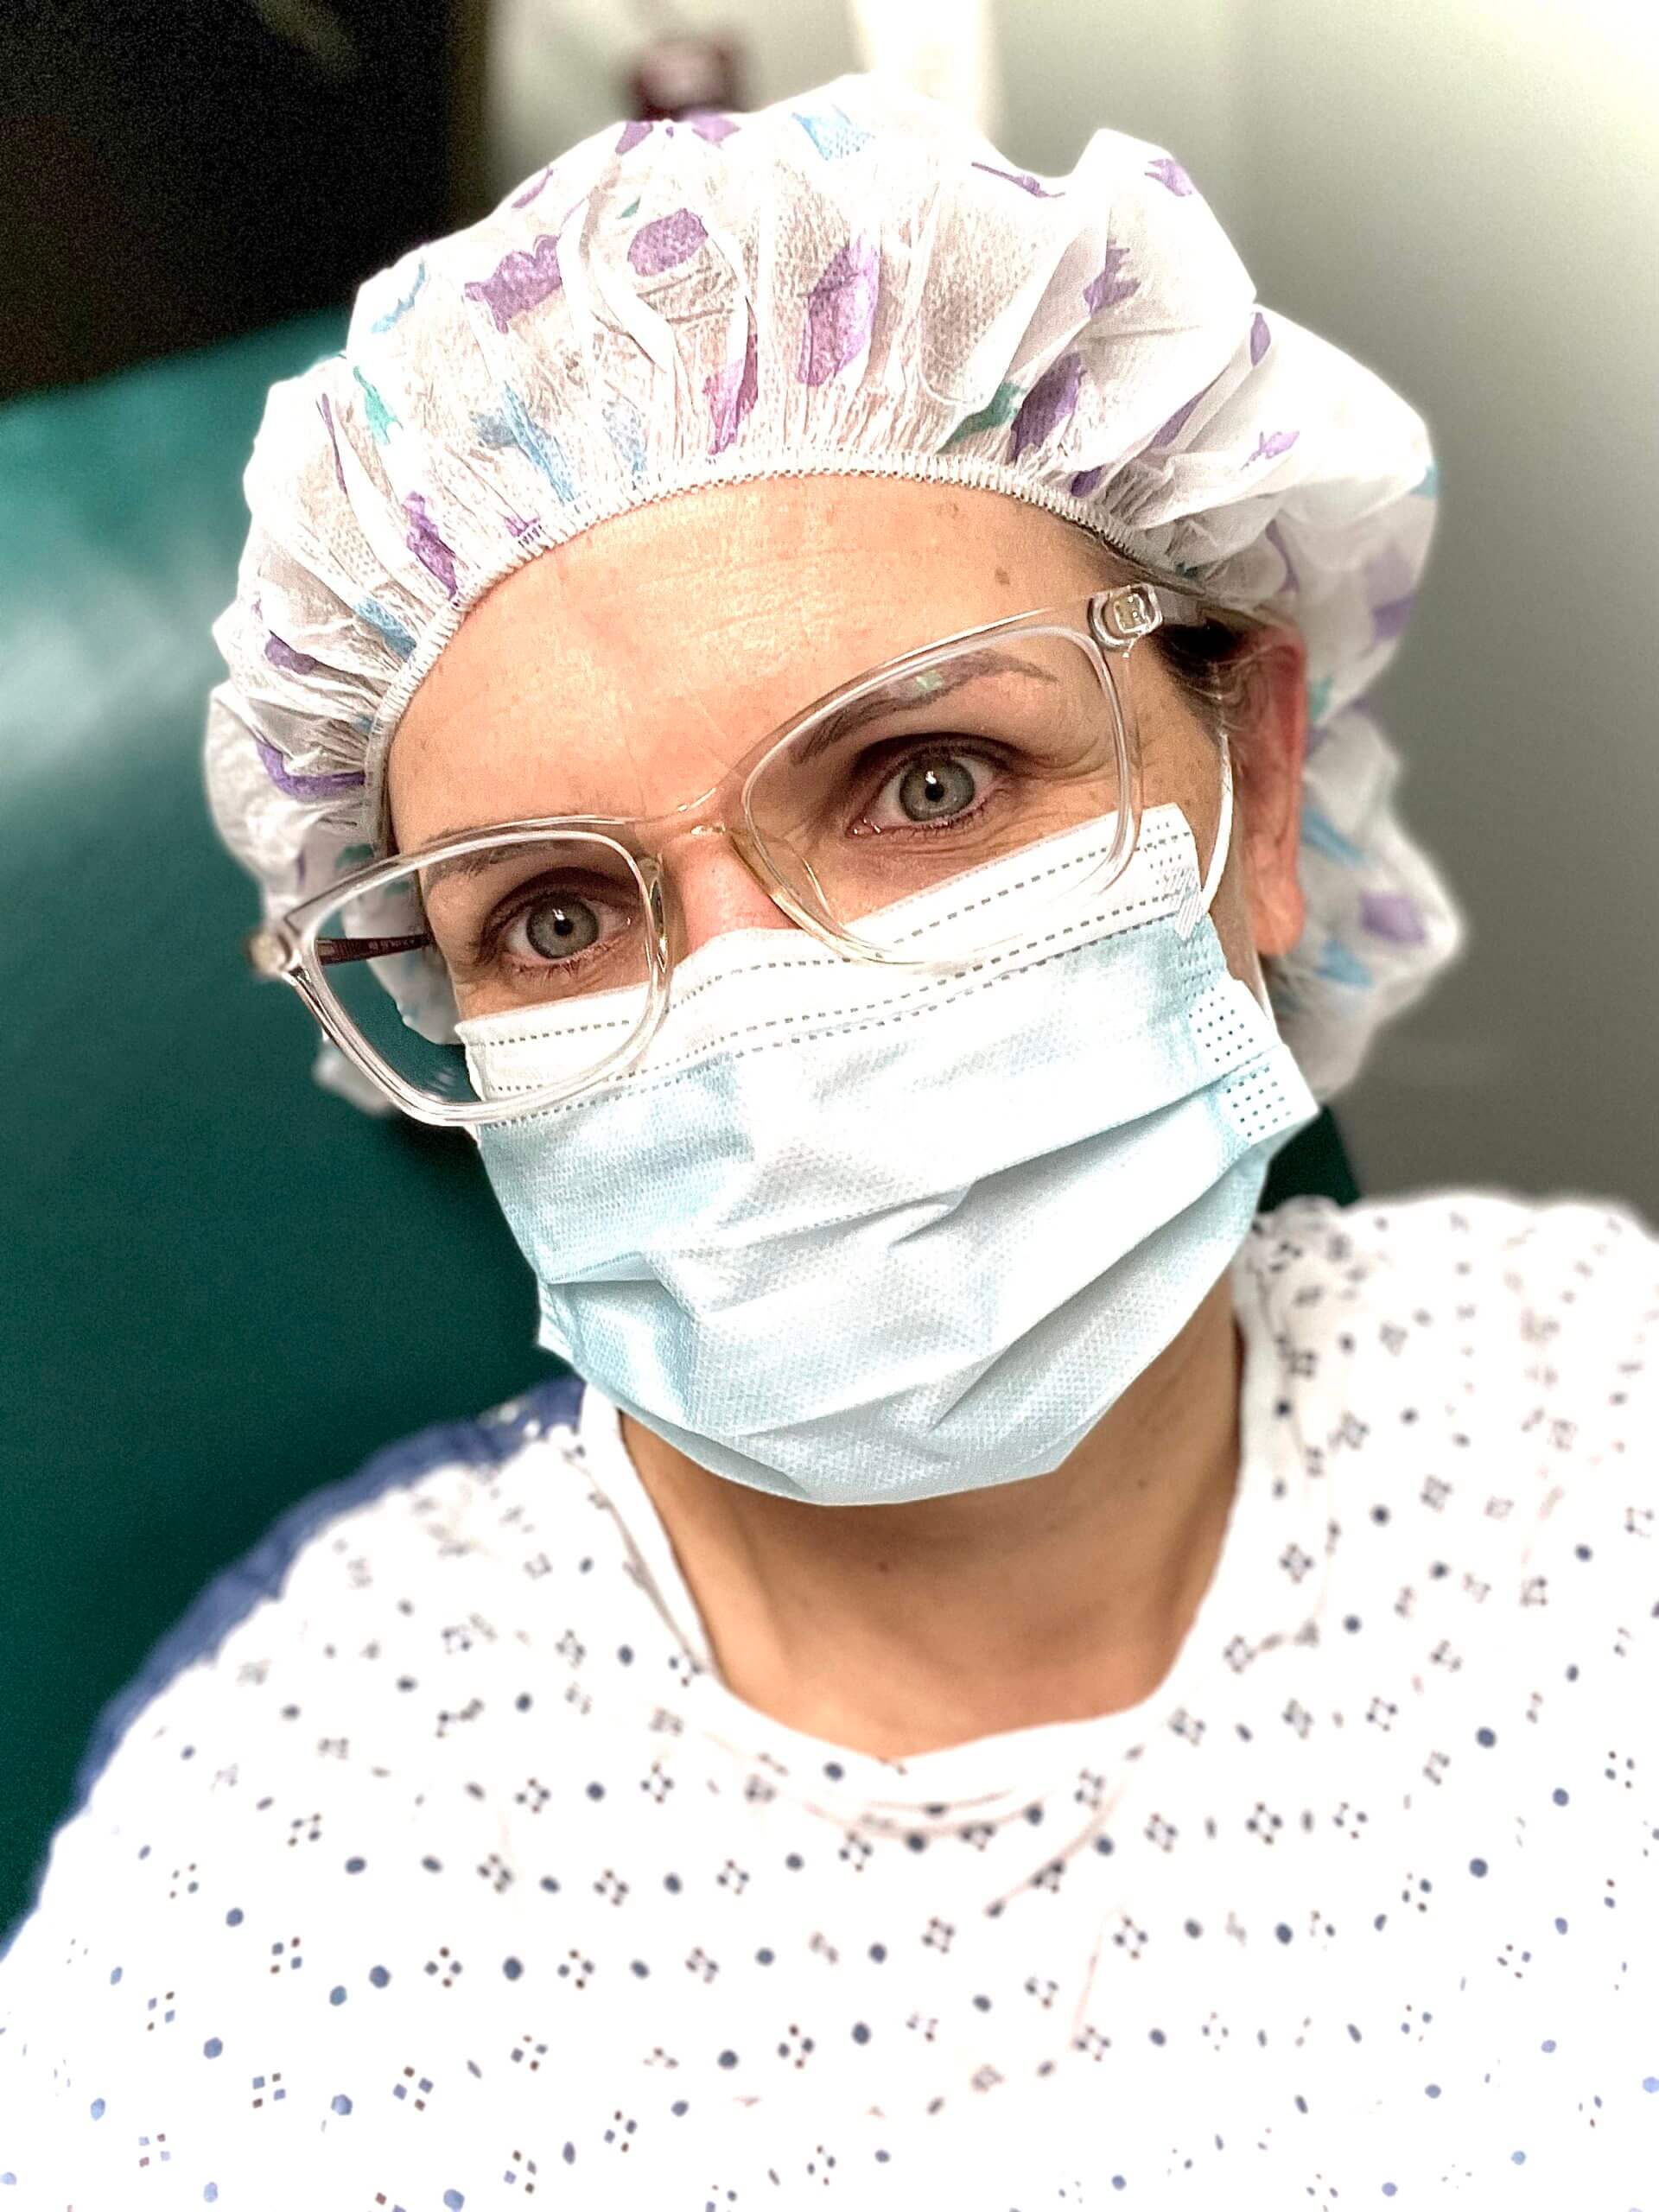 Color headshot of a white woman looking into camera. She id dressed for surgery in a gown, hairnet, mask, and is wearing clear-framed glasses.